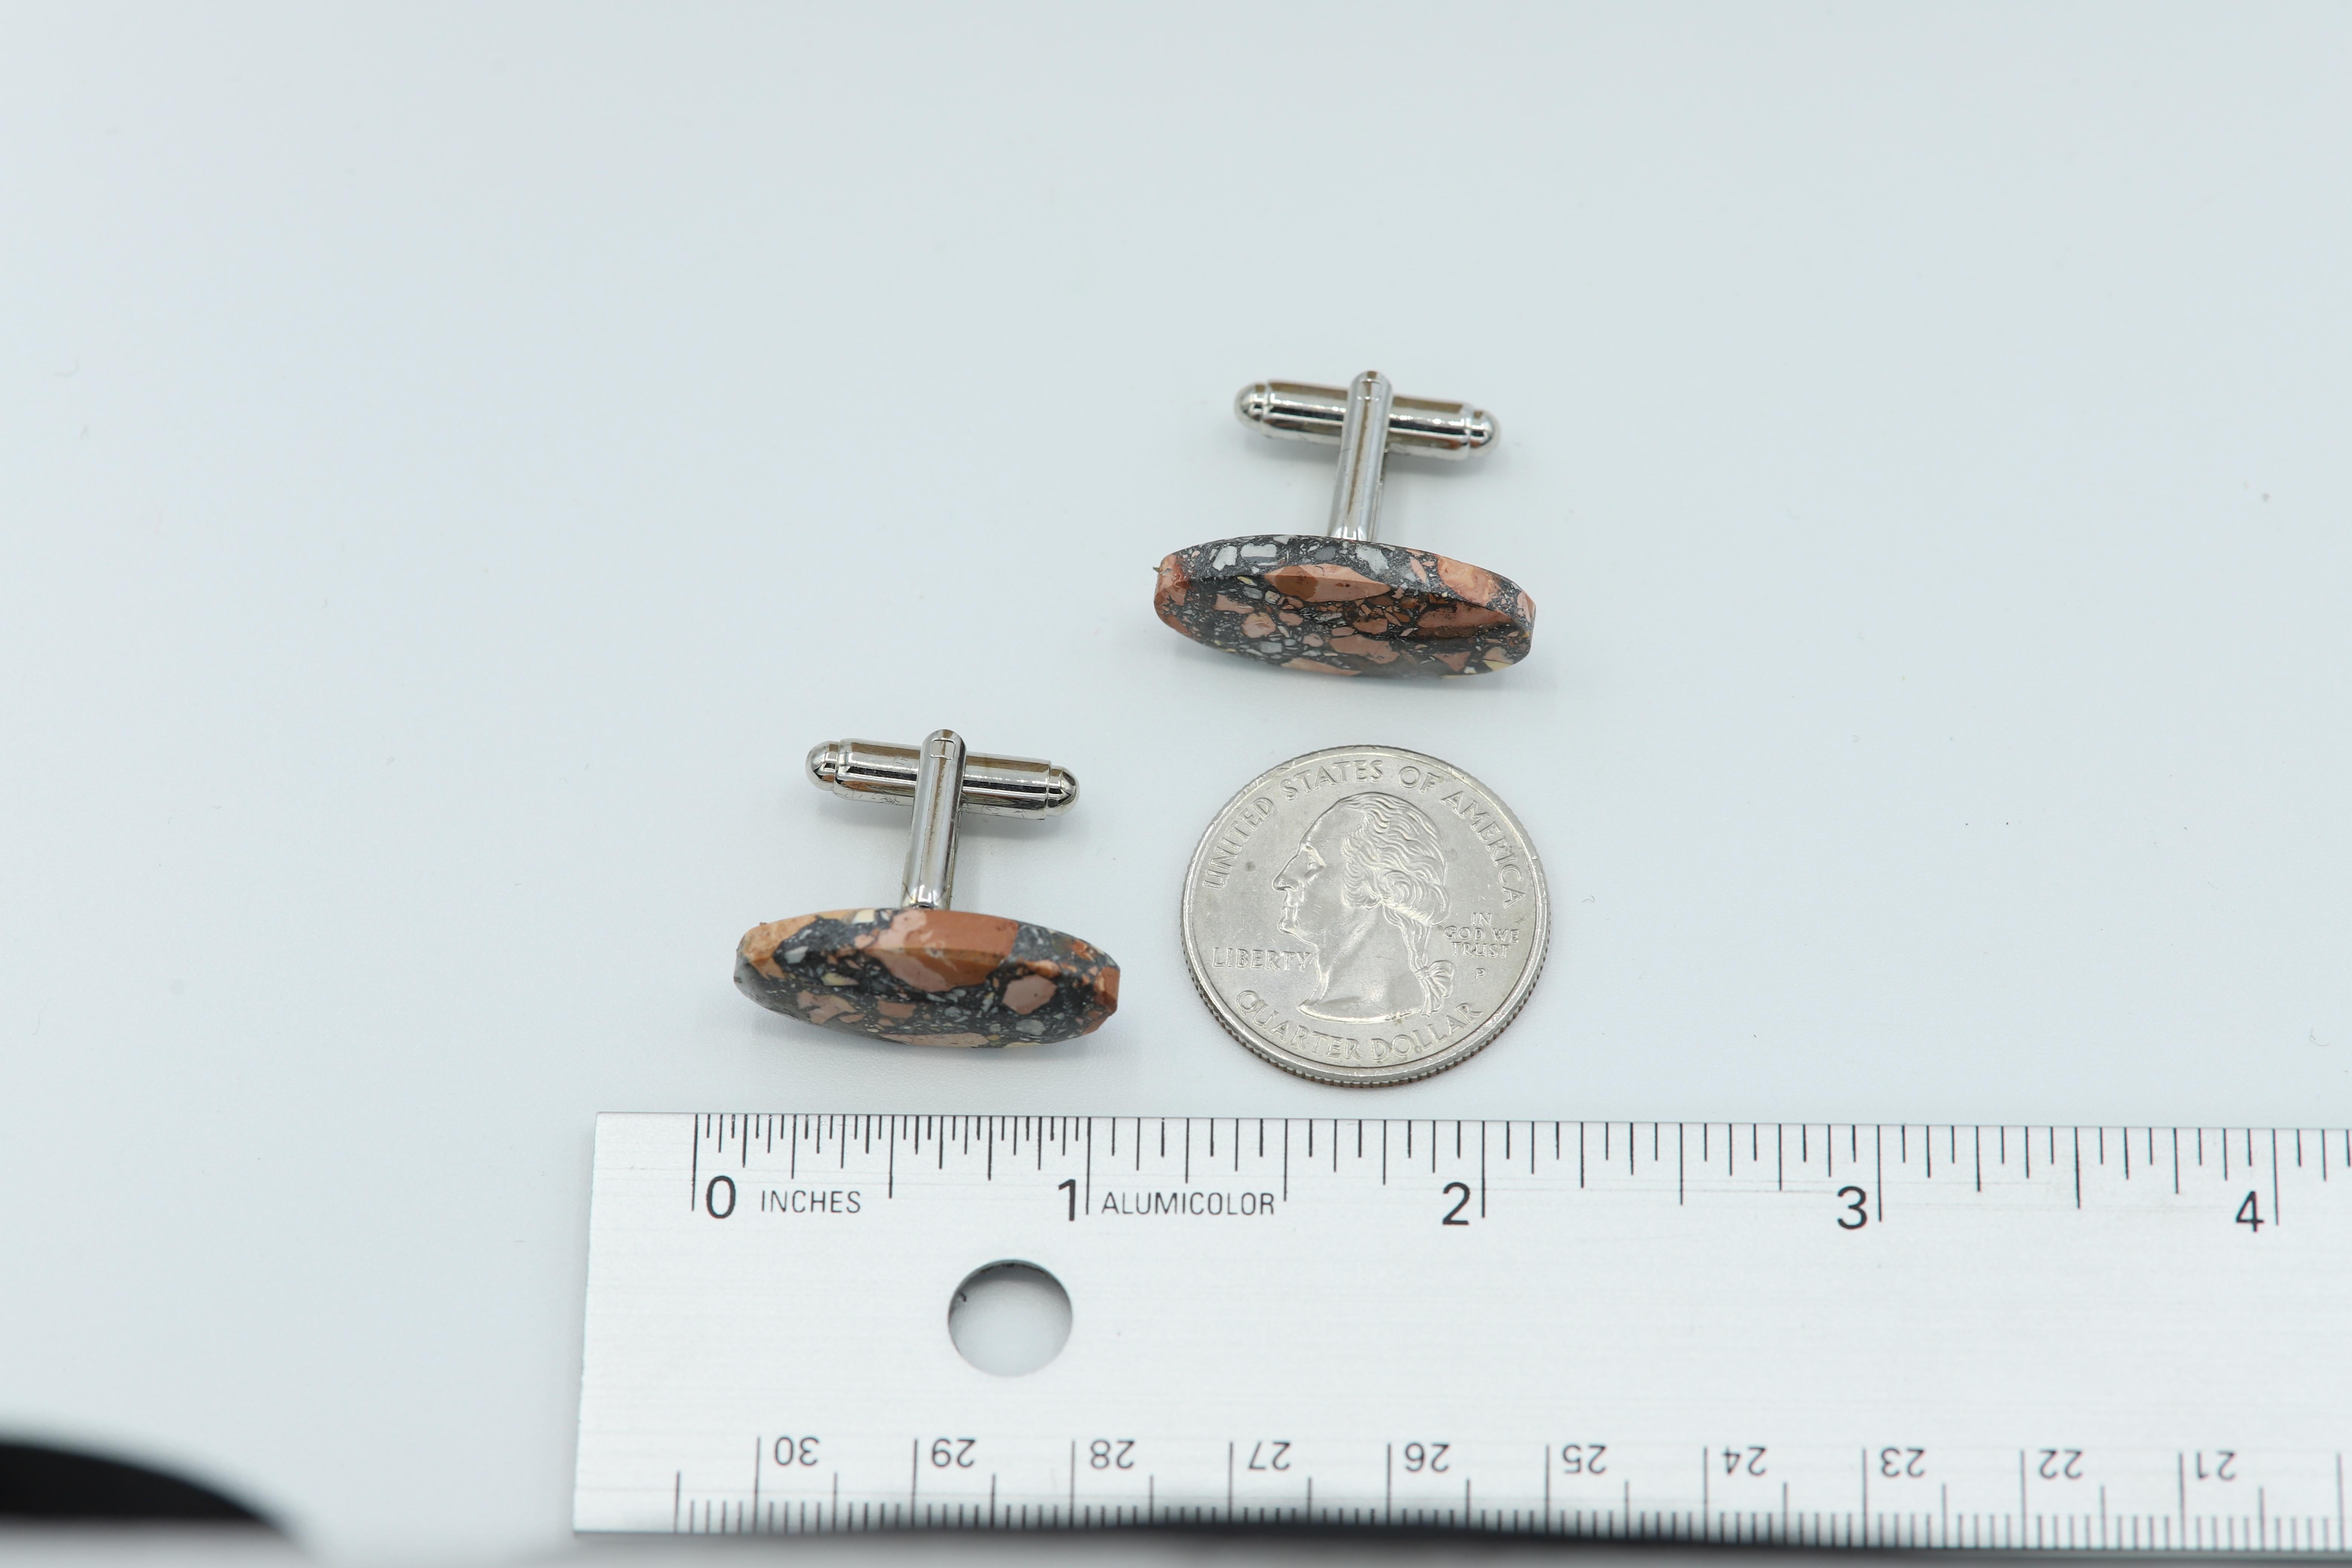 New unique men's cufflink - natural stone.
Stone name: Maligano jasper
Approx. size 25 X 12 MM
Beautiful natural texture.
Imperfection may exist due to natural formations.
Back part metal is a general alloy metal - none precious
Gift Box